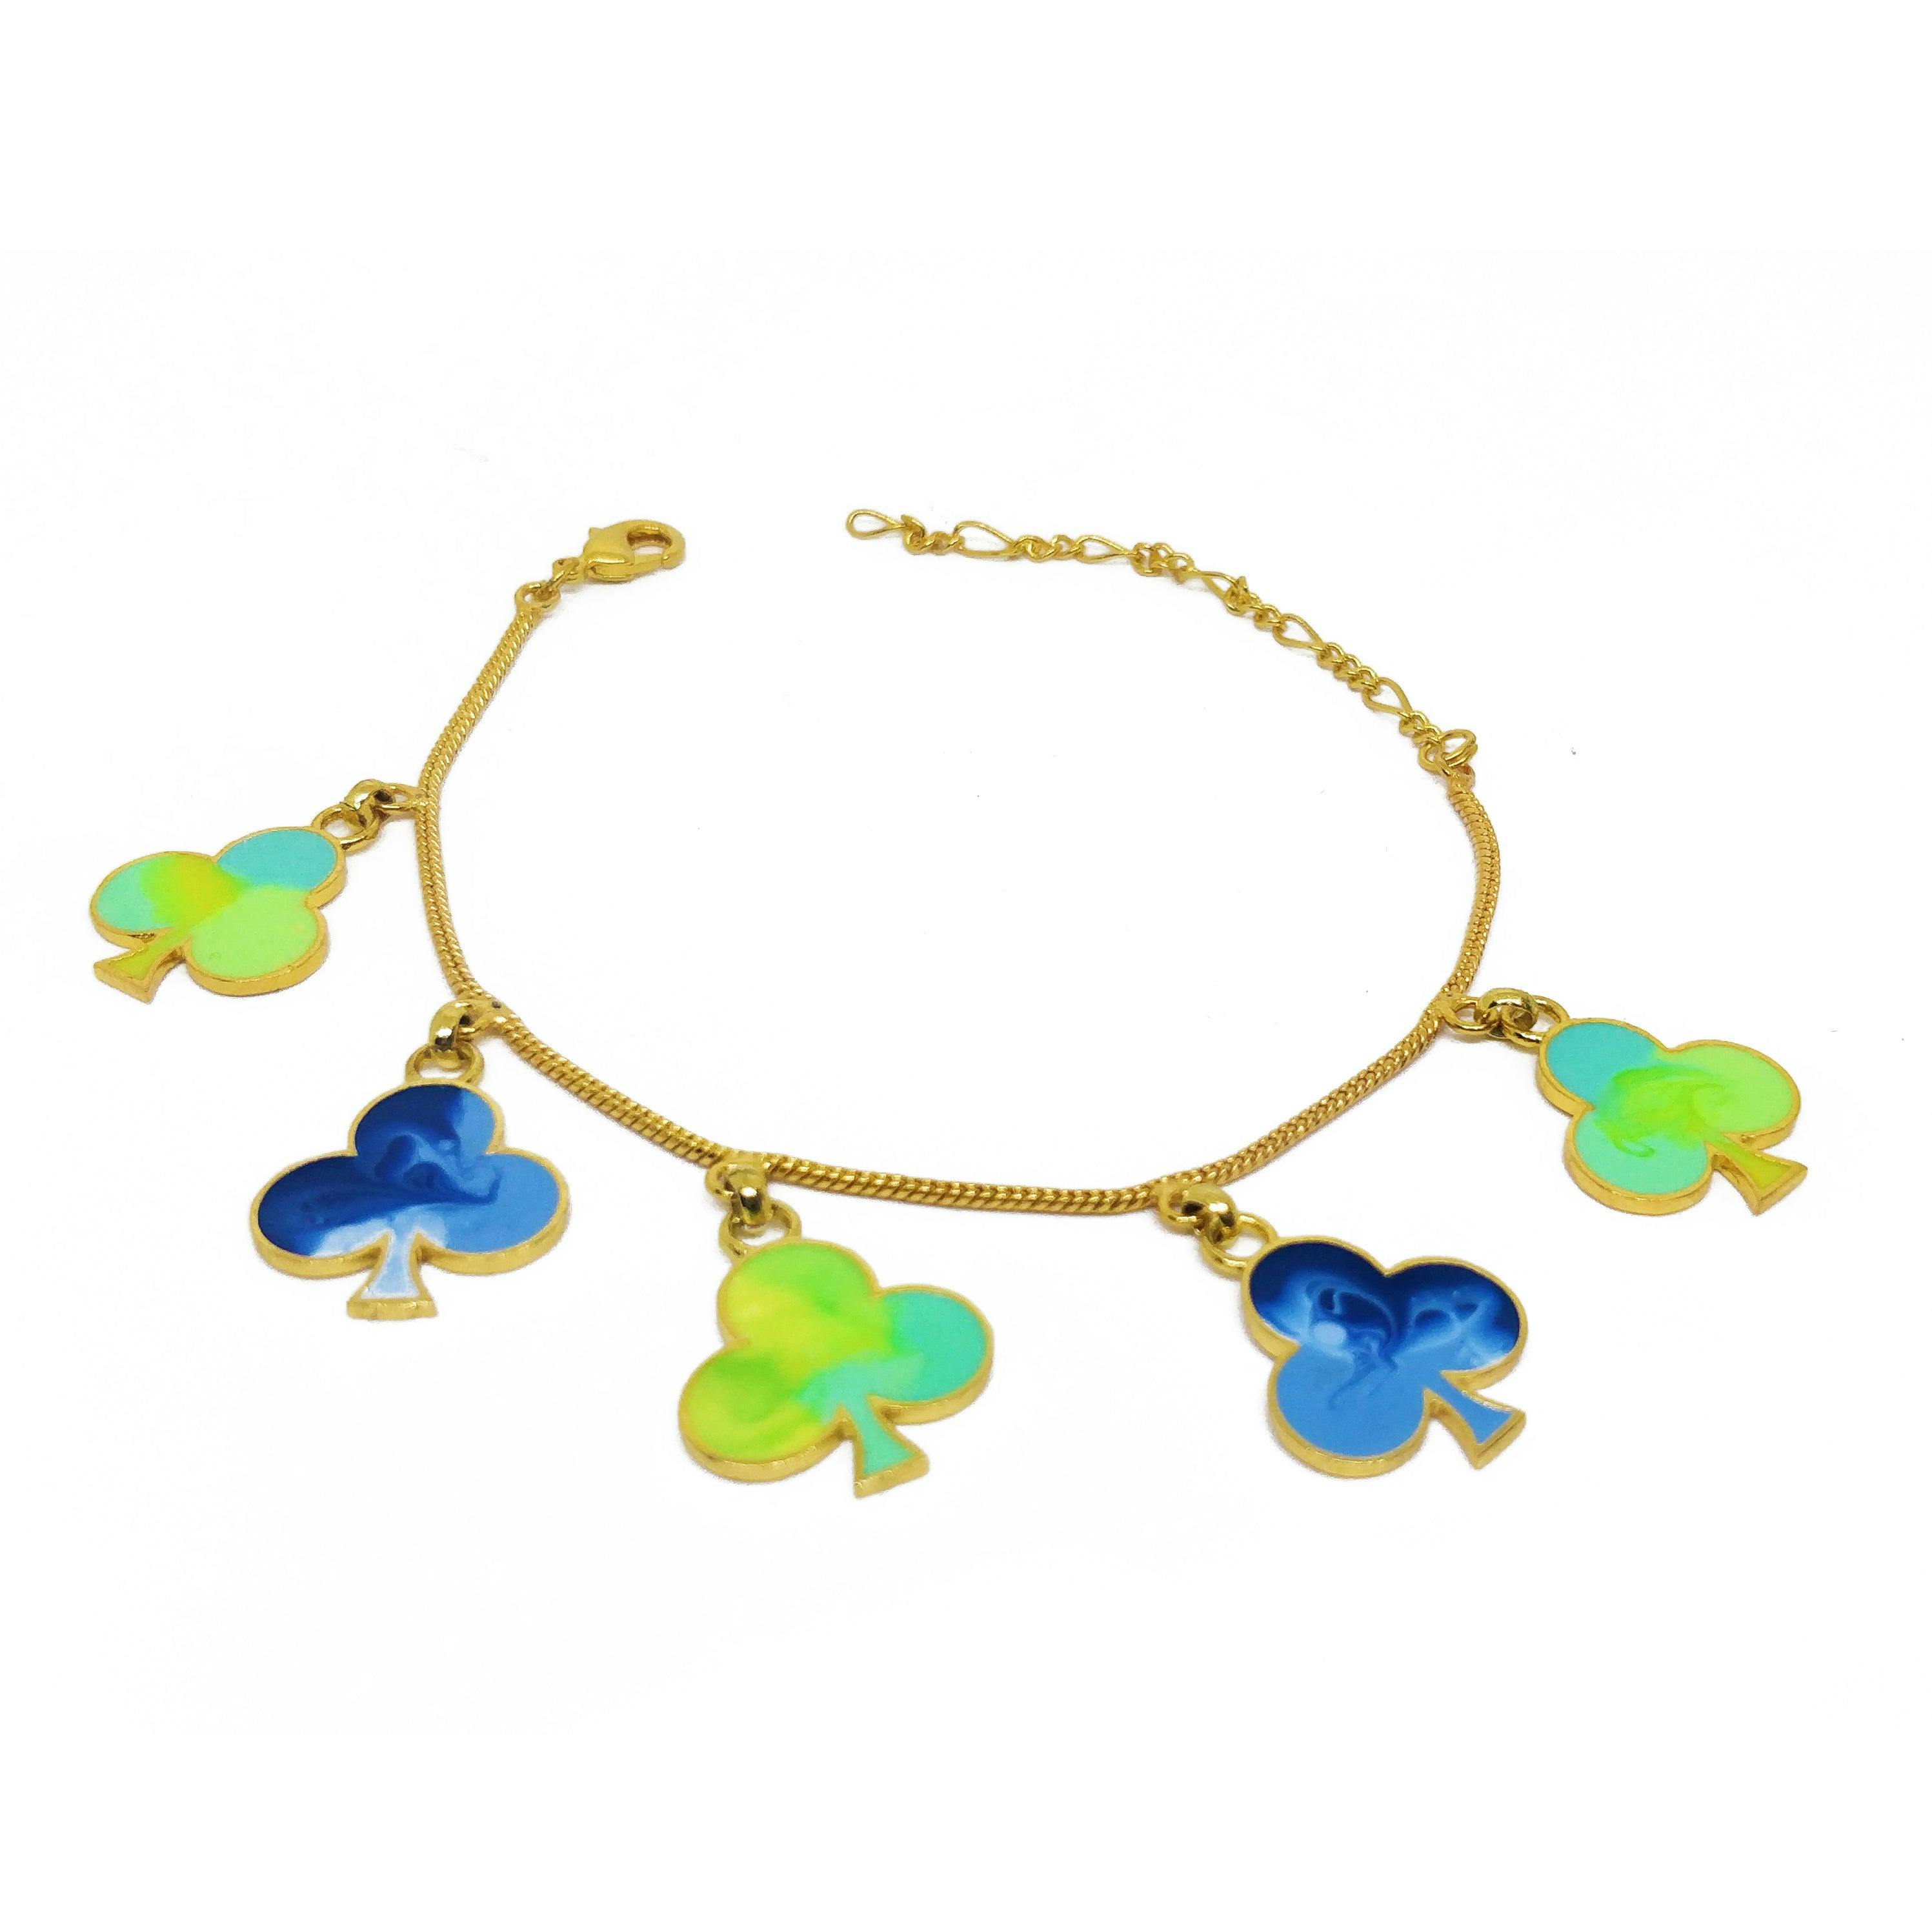 Five of clubs bracelet, a product by Aditi Bhatt